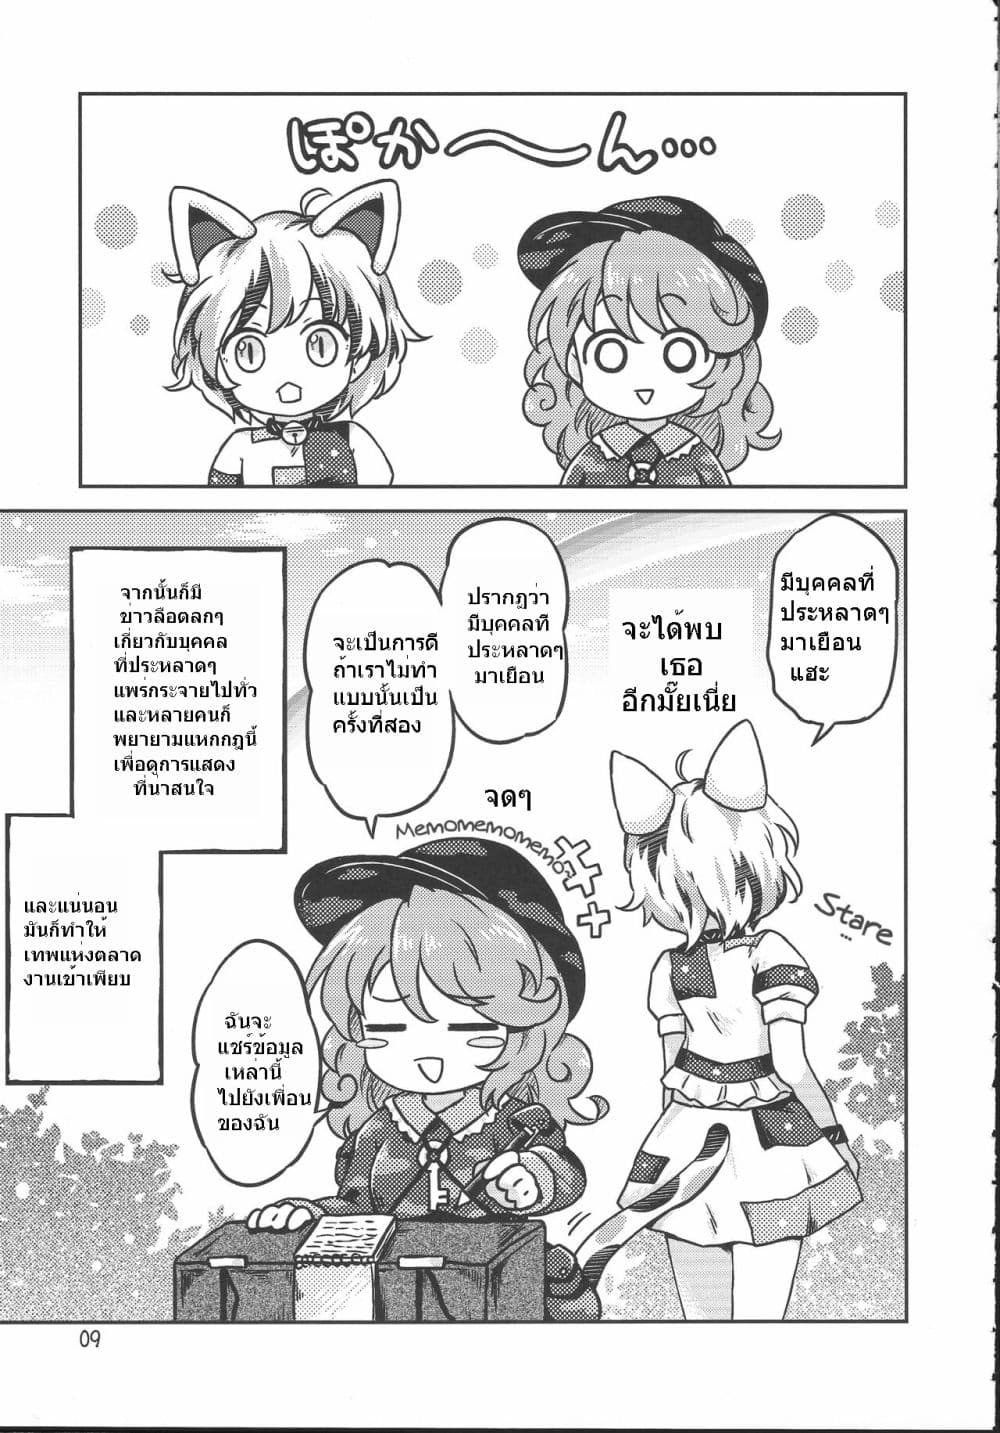 Touhou Project Chima Book By Pote 1-1